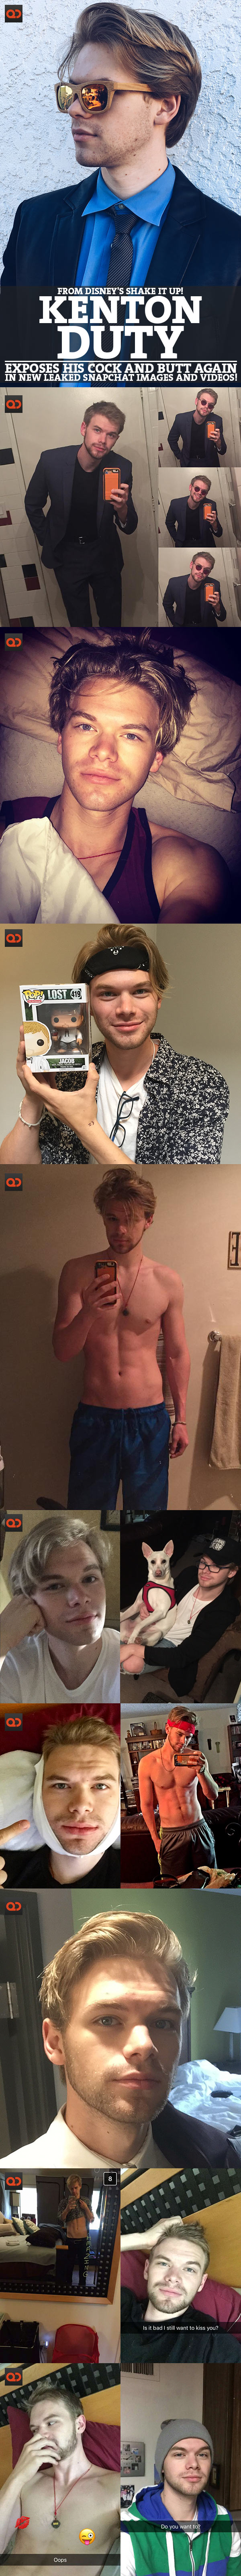 Kenton Duty Exposes His Cock And Butt Again In New Leaked Snapchat Images And Videos!!